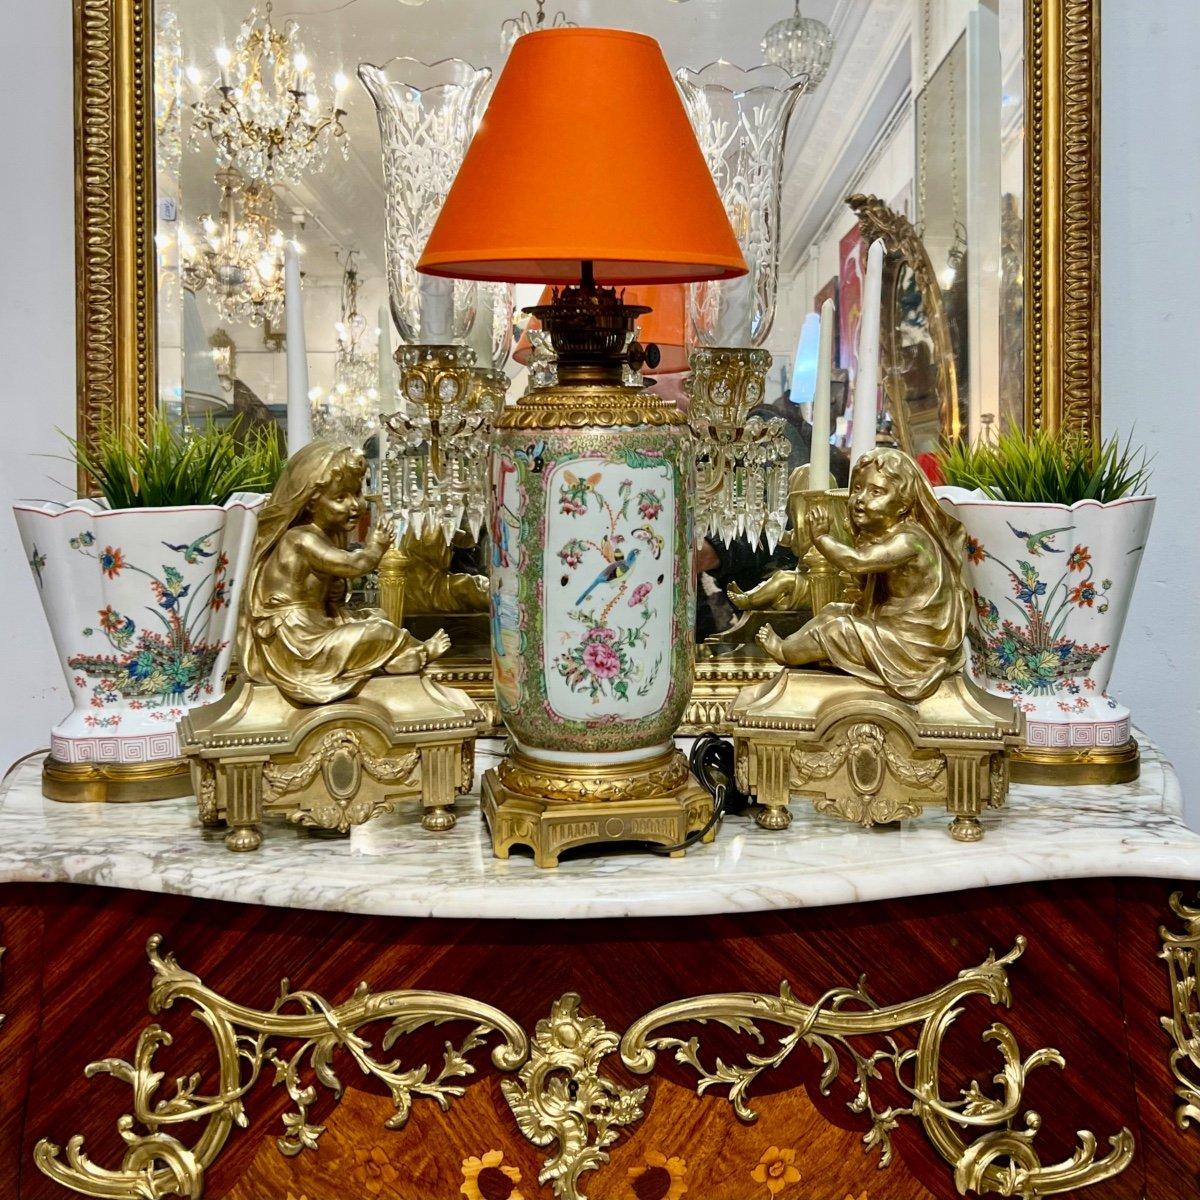 We present you with this impressively sized Cantonese porcelain lamp in a cylindrical shape, dating back to the Napoleon III era. It features prominent images depicting scenes from the imperial Chinese palace life within its cartouche. It is further